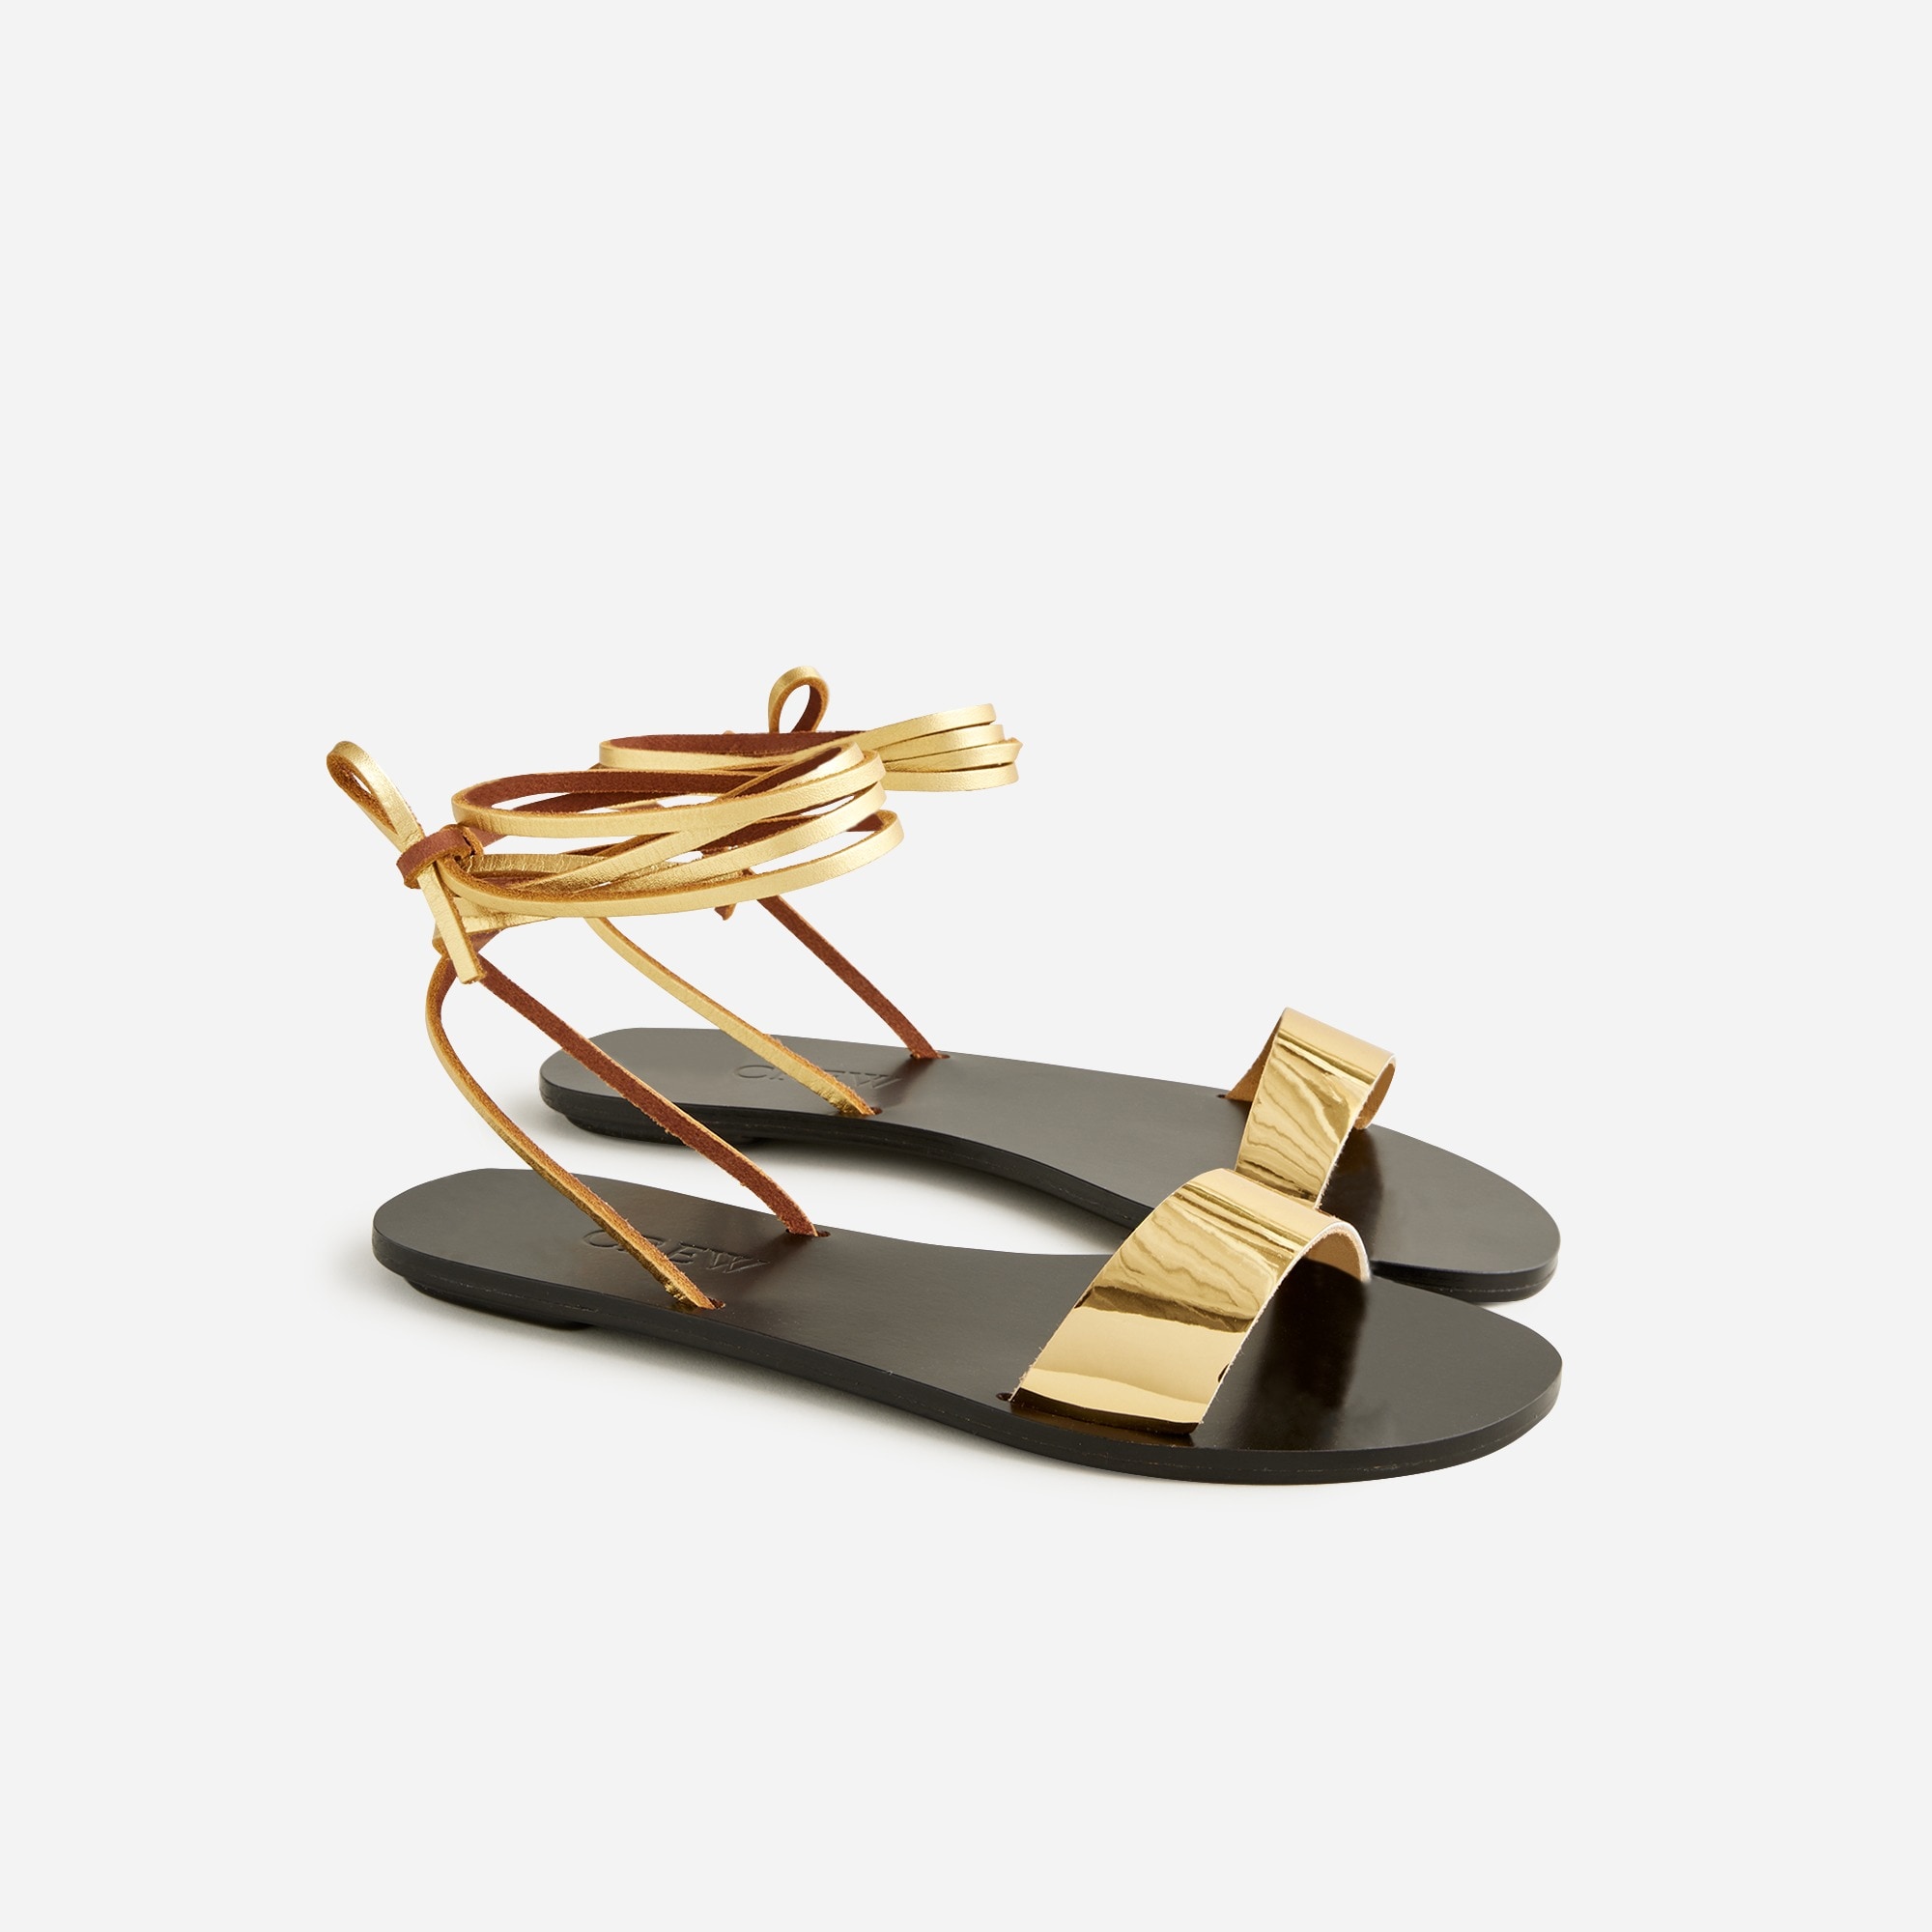  Carsen made-in-Italy lace-up sandals in metallic leather